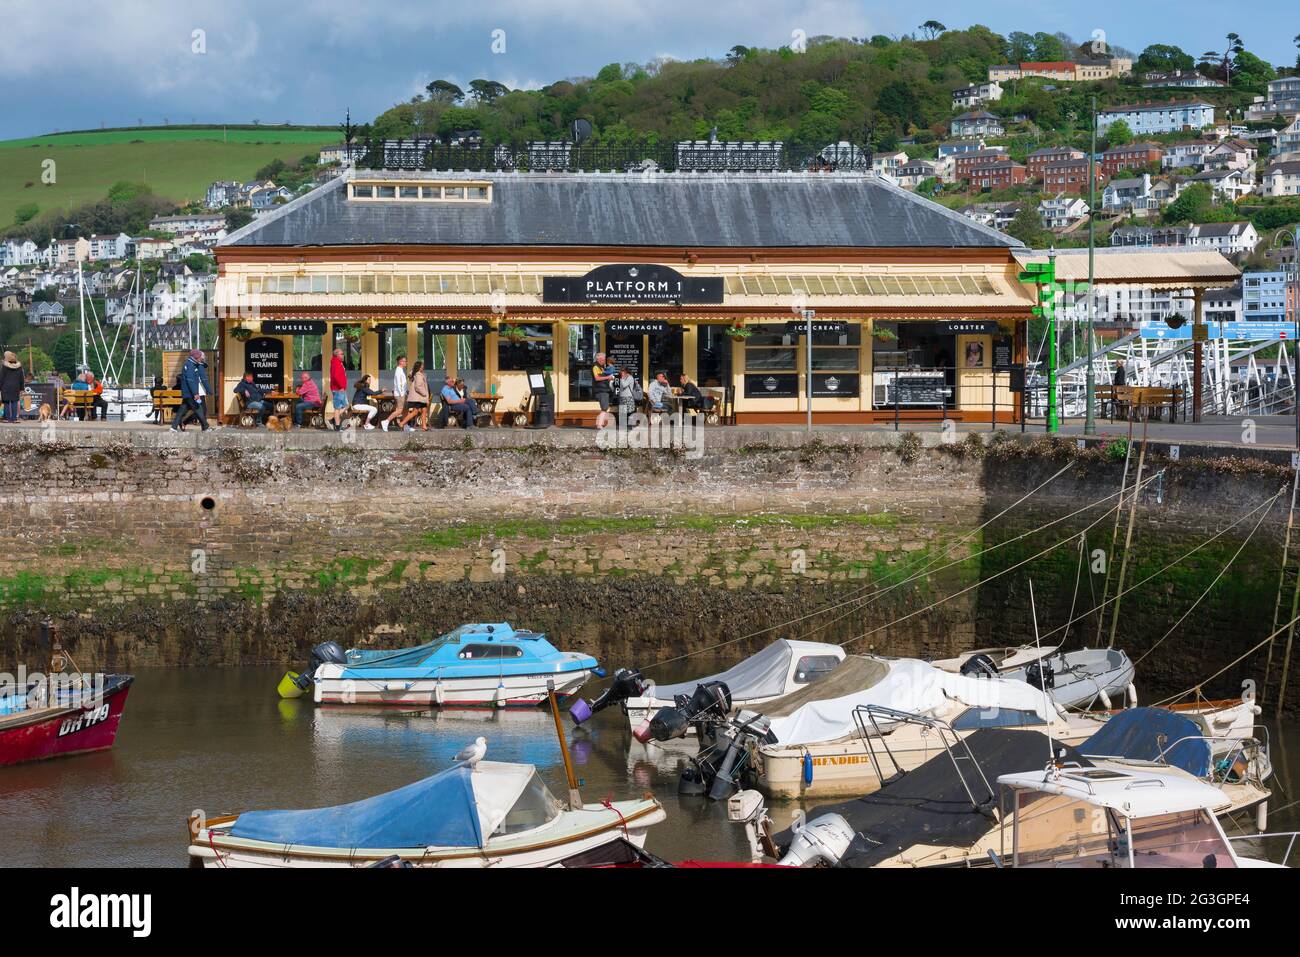 Platform 1 Dartmouth, view of the Platform 1 Champagne Bar And Restaurant, a former GWR station building sited beside Dartmouth harbour, Devon UK Stock Photo